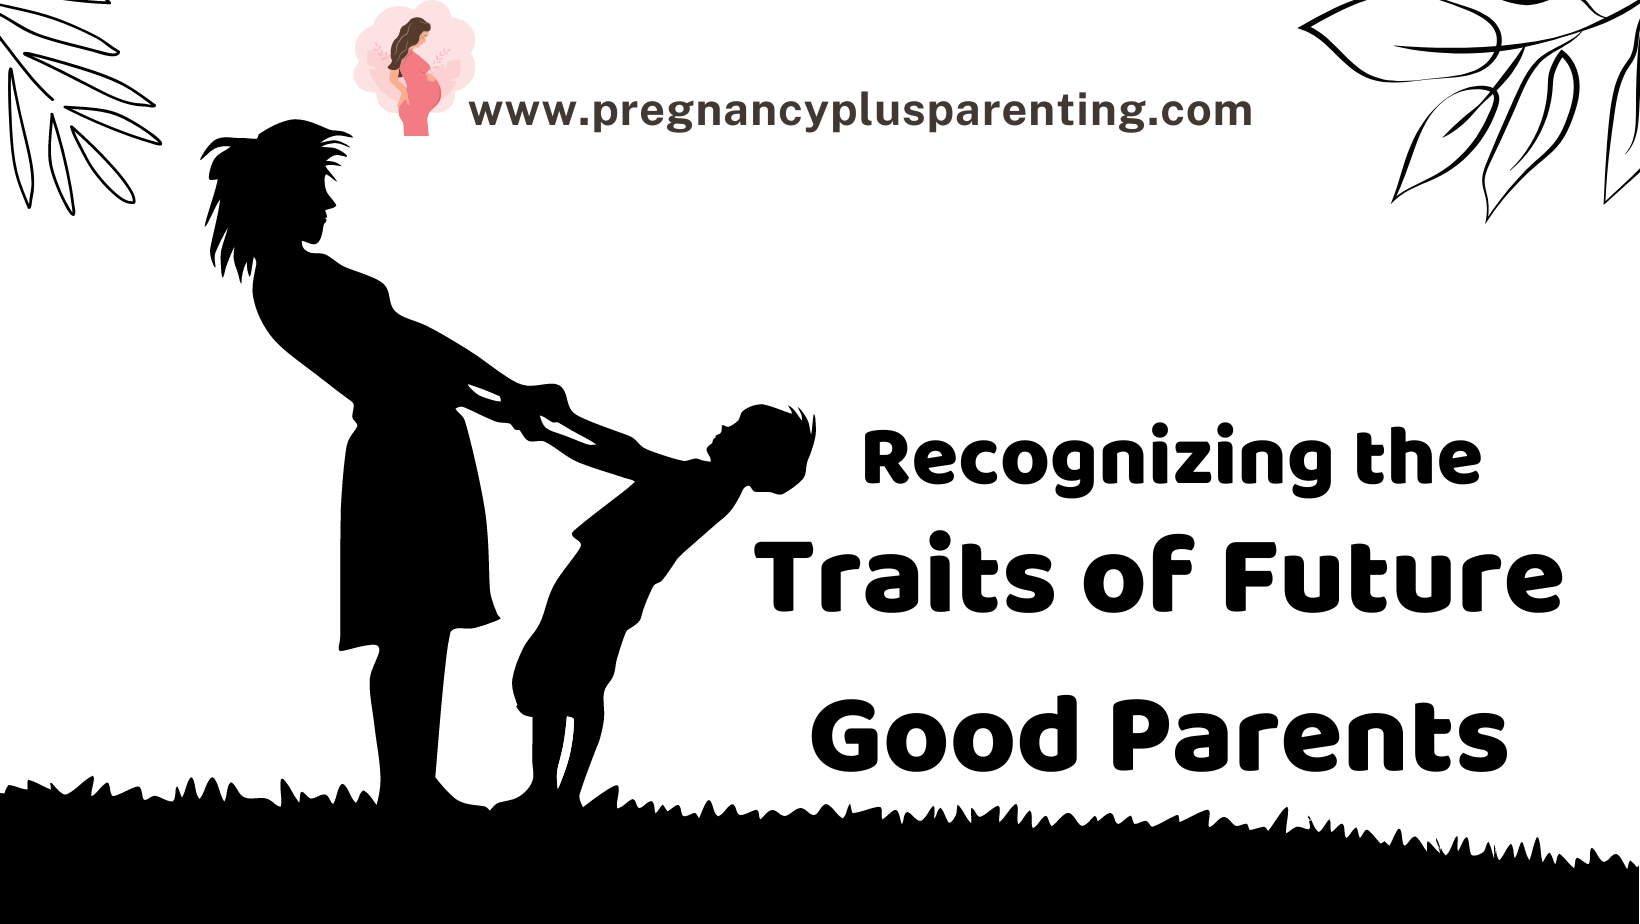 Recognizing the Traits of Future Good Parents